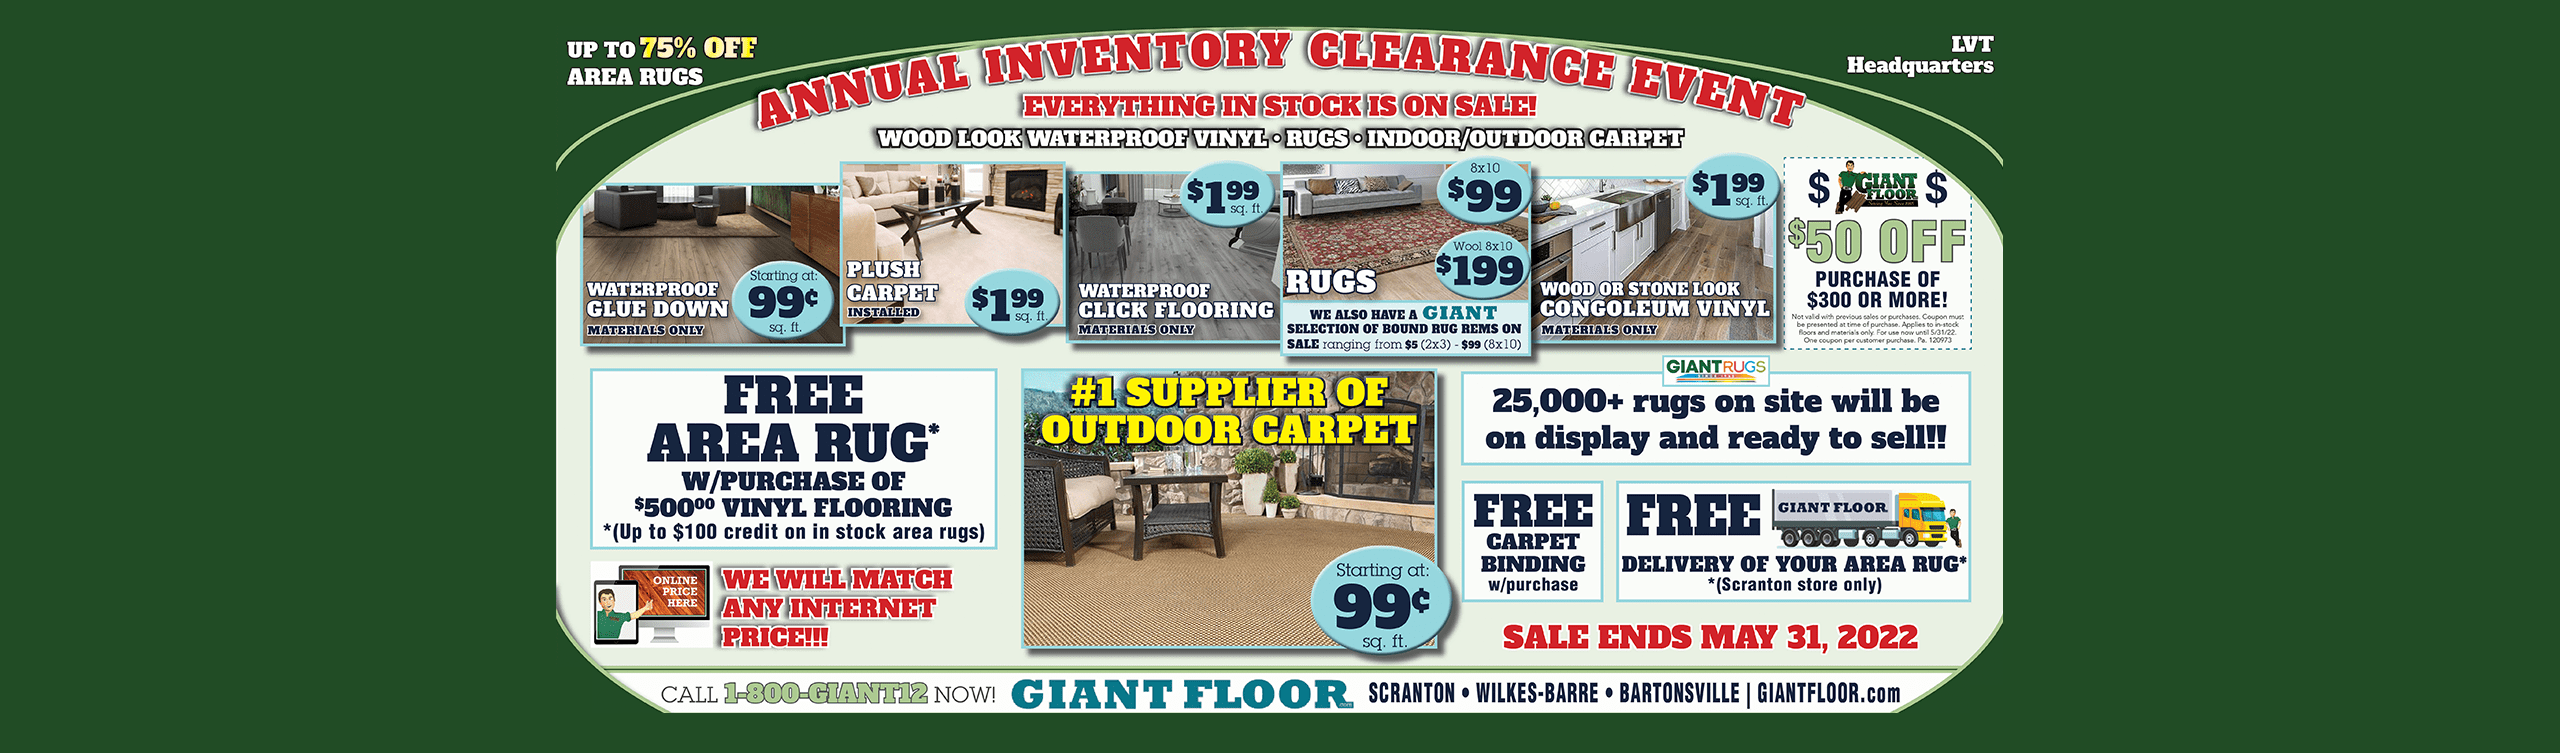 inventory clearance event